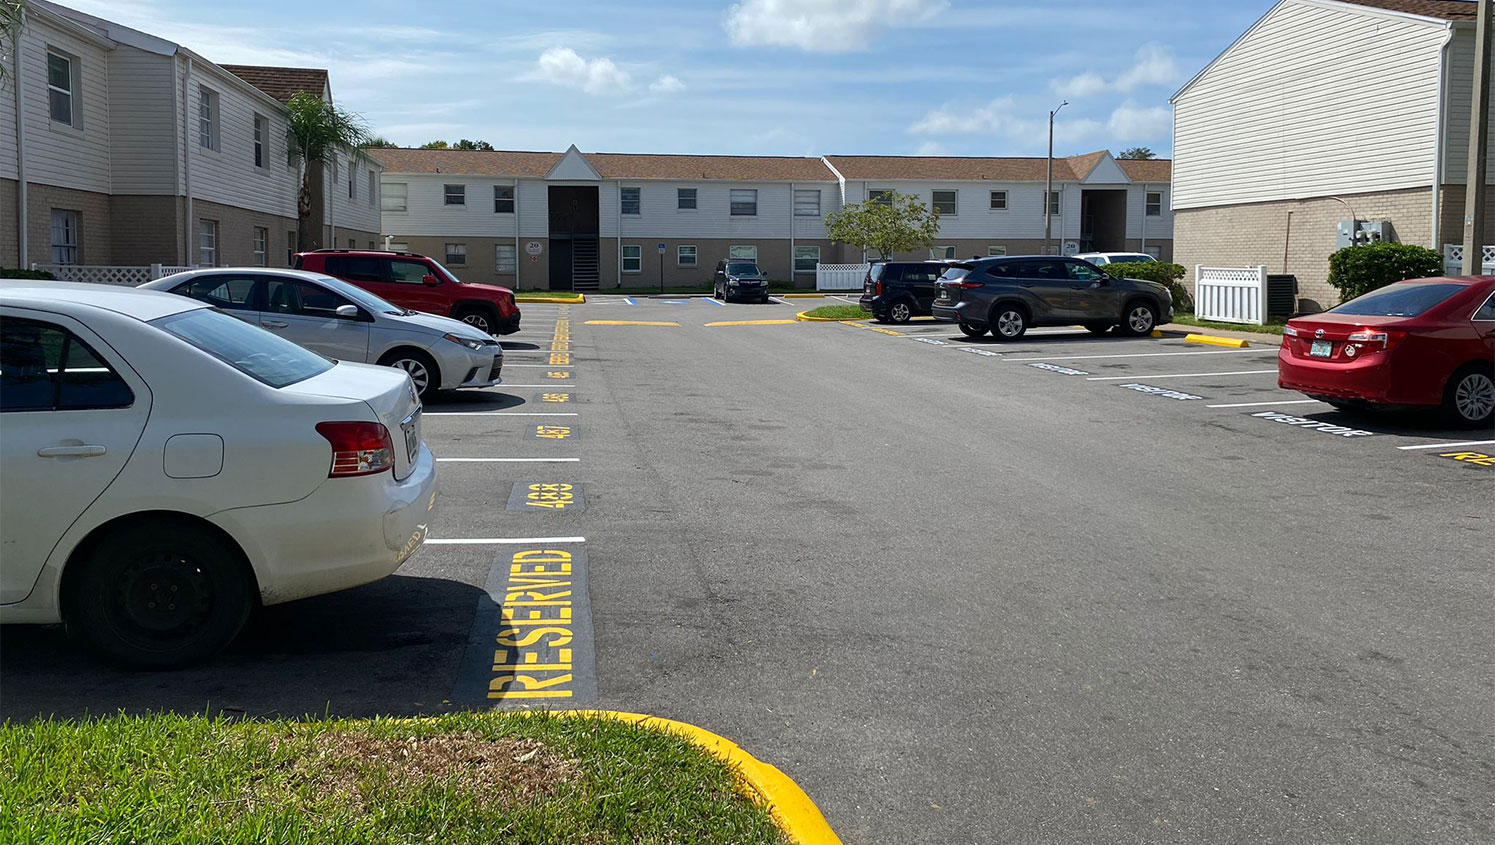 tampa apartment complex with reserved and visitor pavement markings